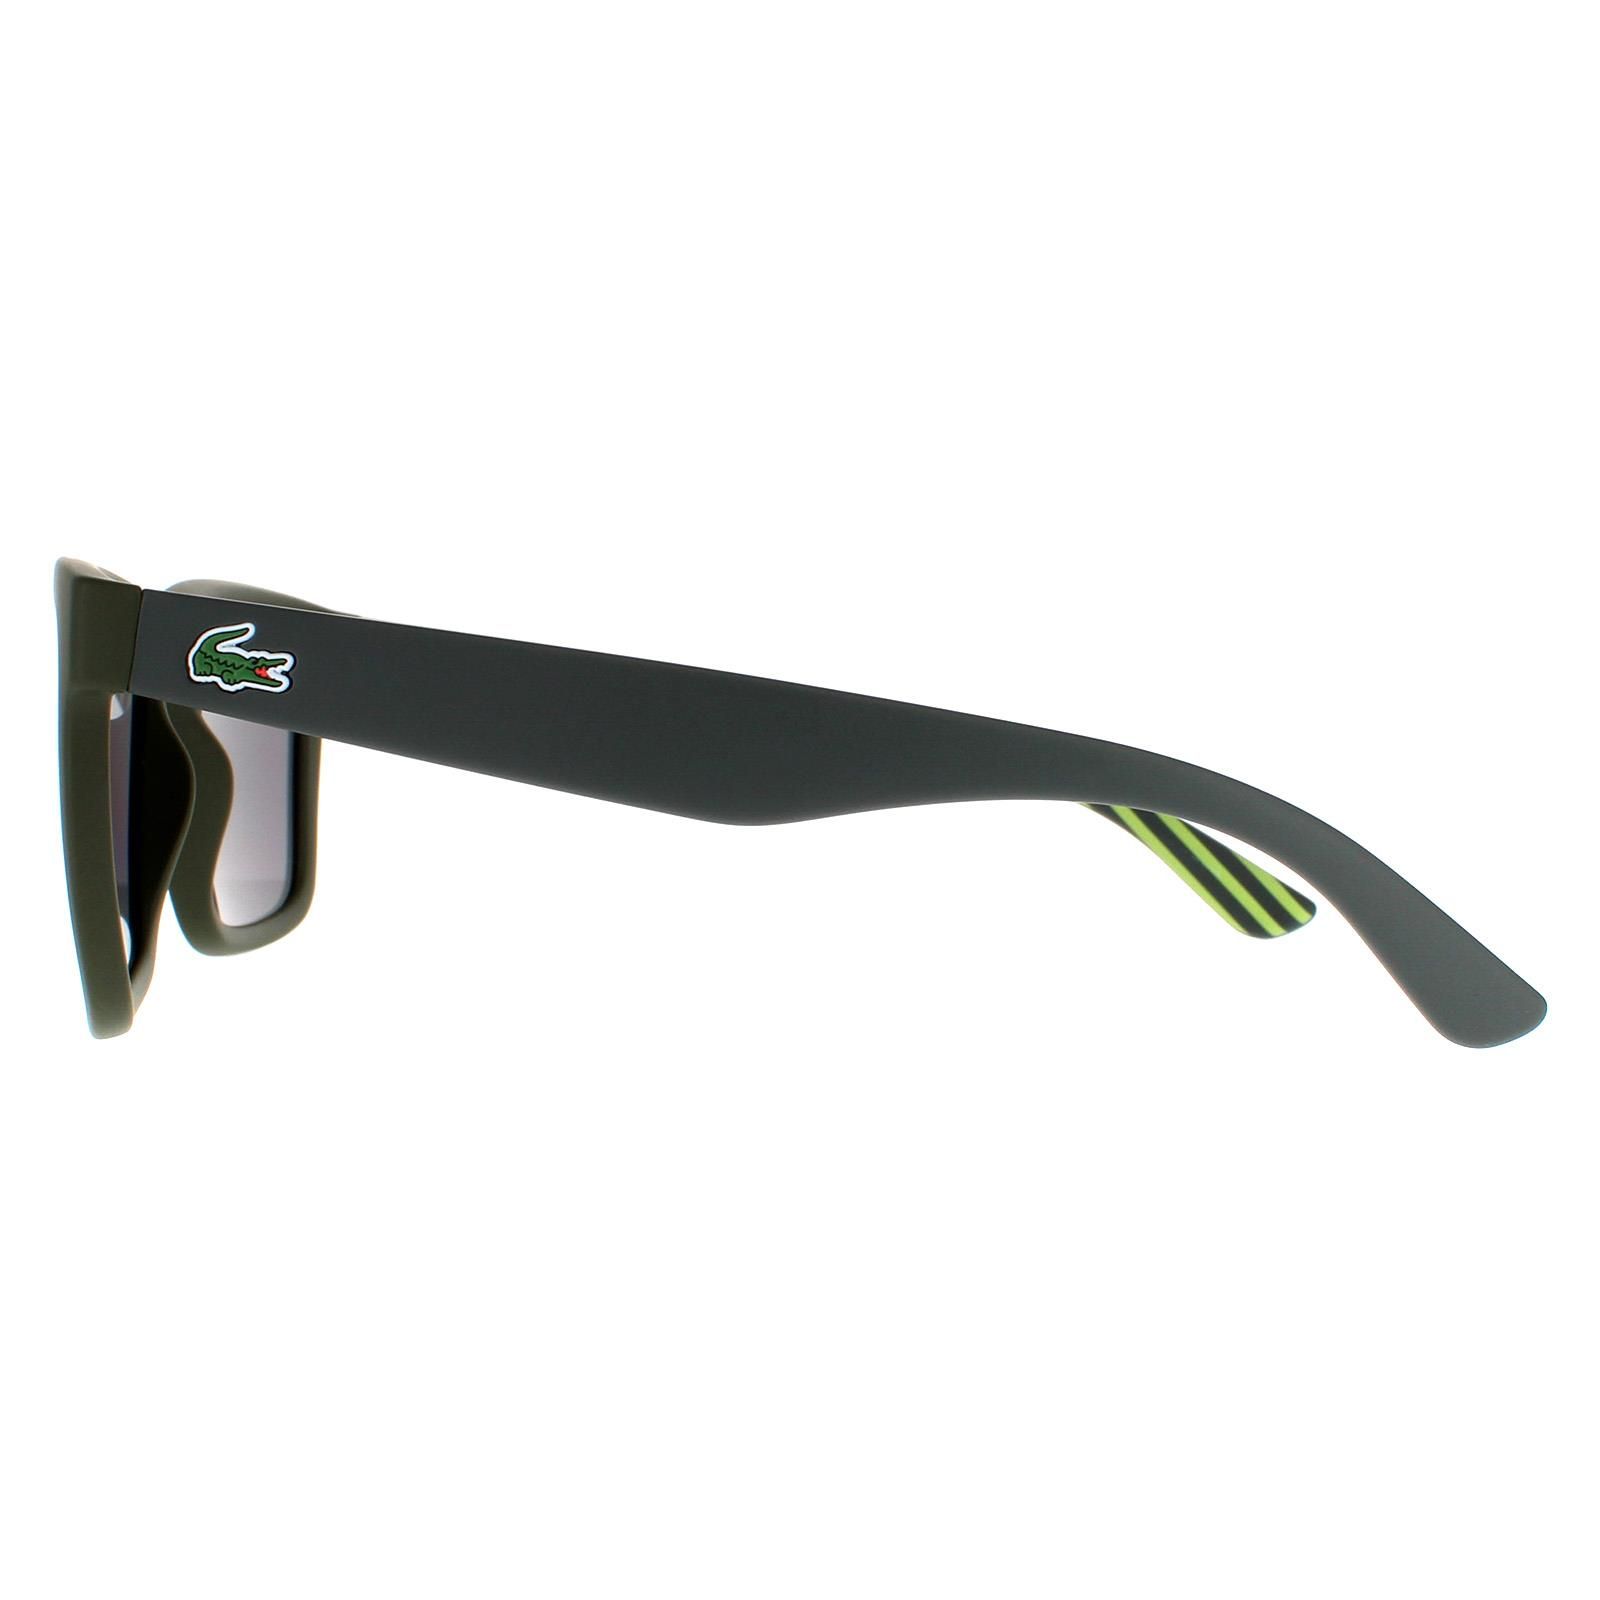 Lacoste Sunglasses L750S 318 Matte Green Green Mirror are a simple style with a classic rectangular look with the instantly recognisable alligator logo on the temple. AN interesting black and white inside pattern completes the look.